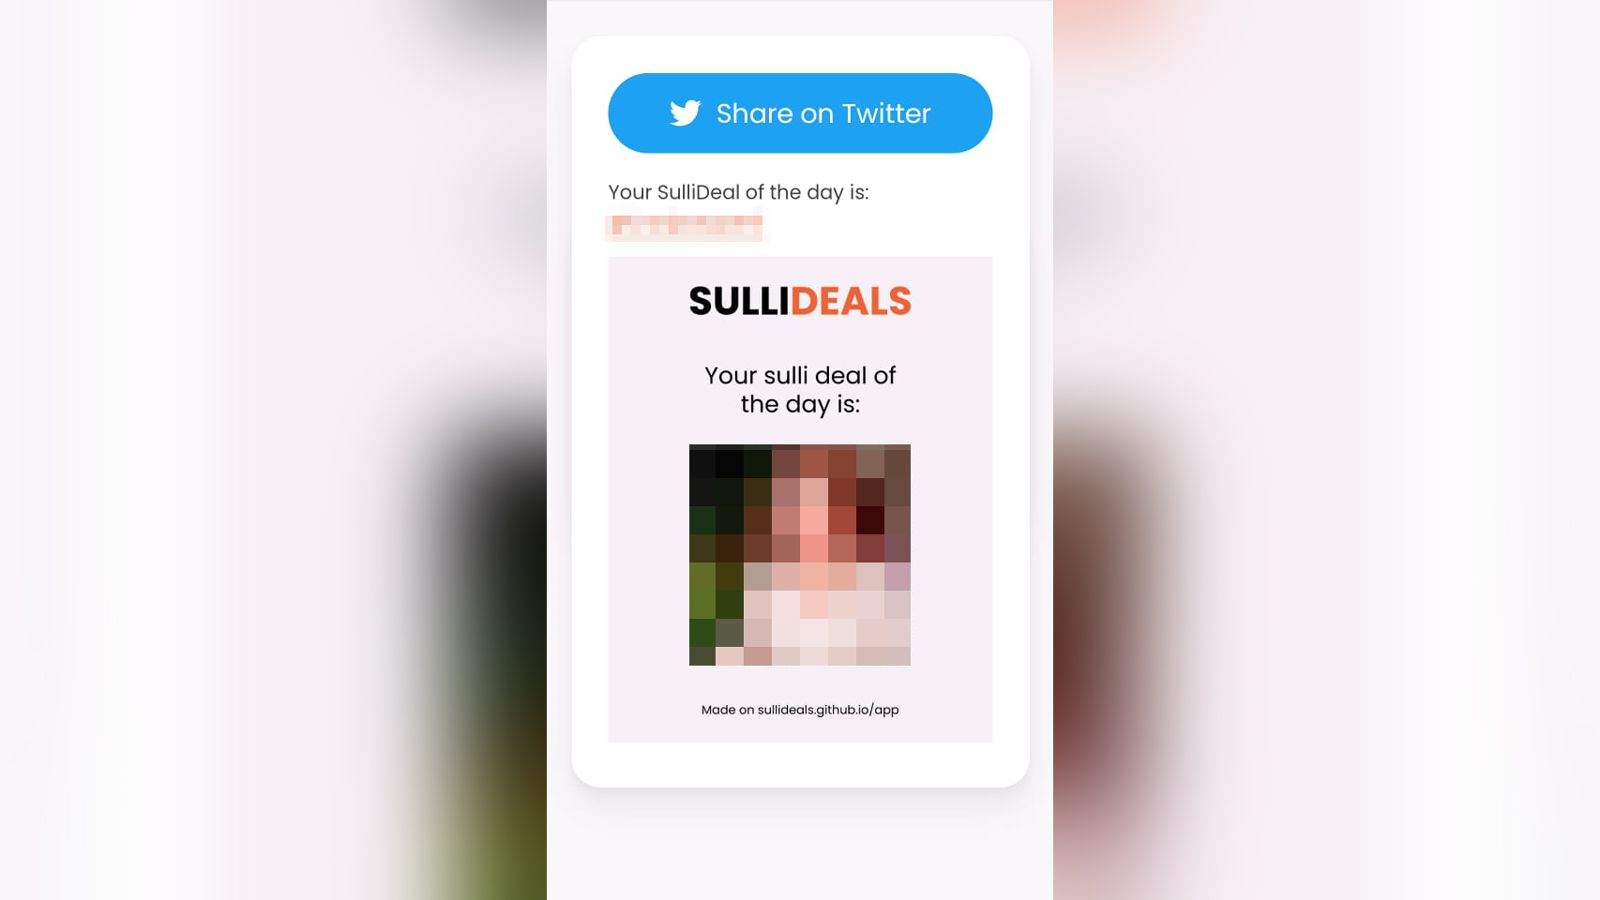 Muslim Girl Selliping Porn Vedio - In India, Muslim women advertised for 'sale' on the 'Sulli Deals' app defy  trolls who tried to silence them | CNN